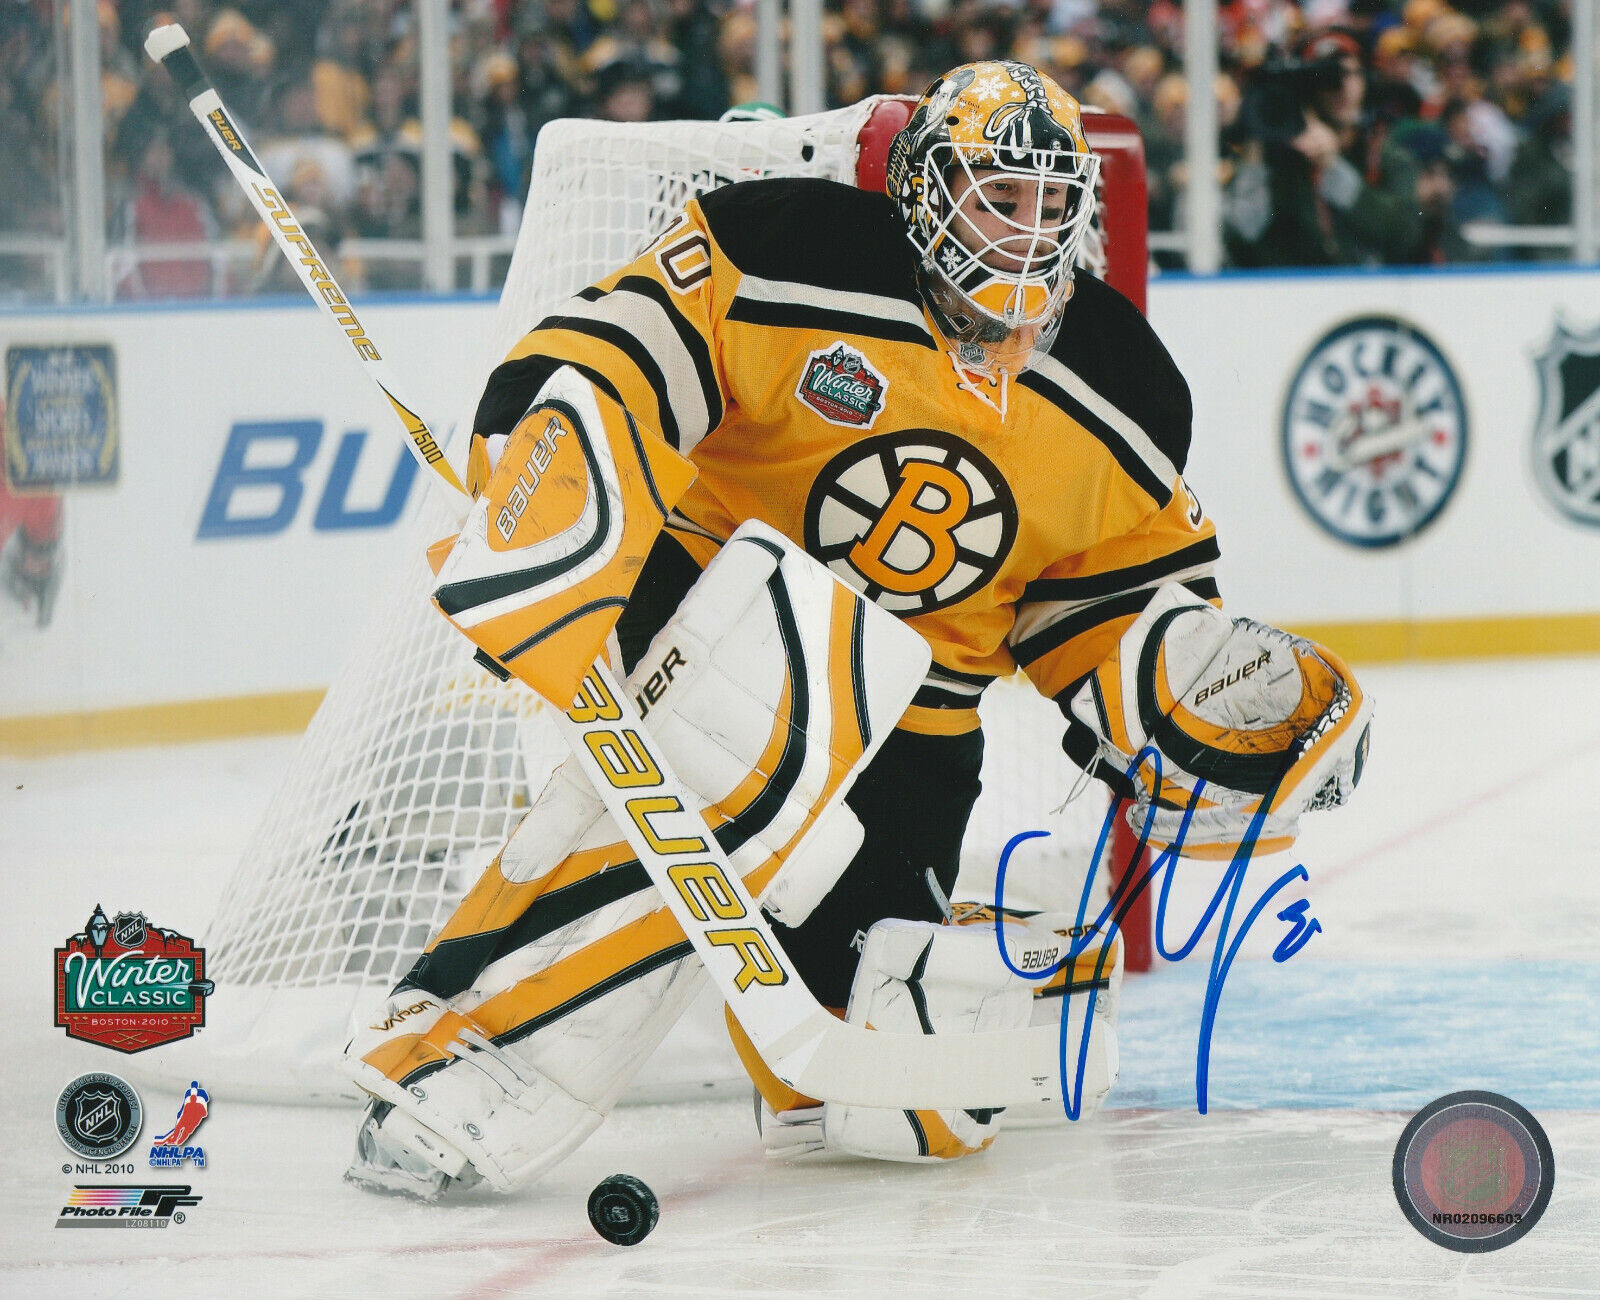 WINTER CLASSIC TIM THOMAS SIGNED BOSTON BRUINS GOALIE 8x10 Photo Poster painting! Autograph